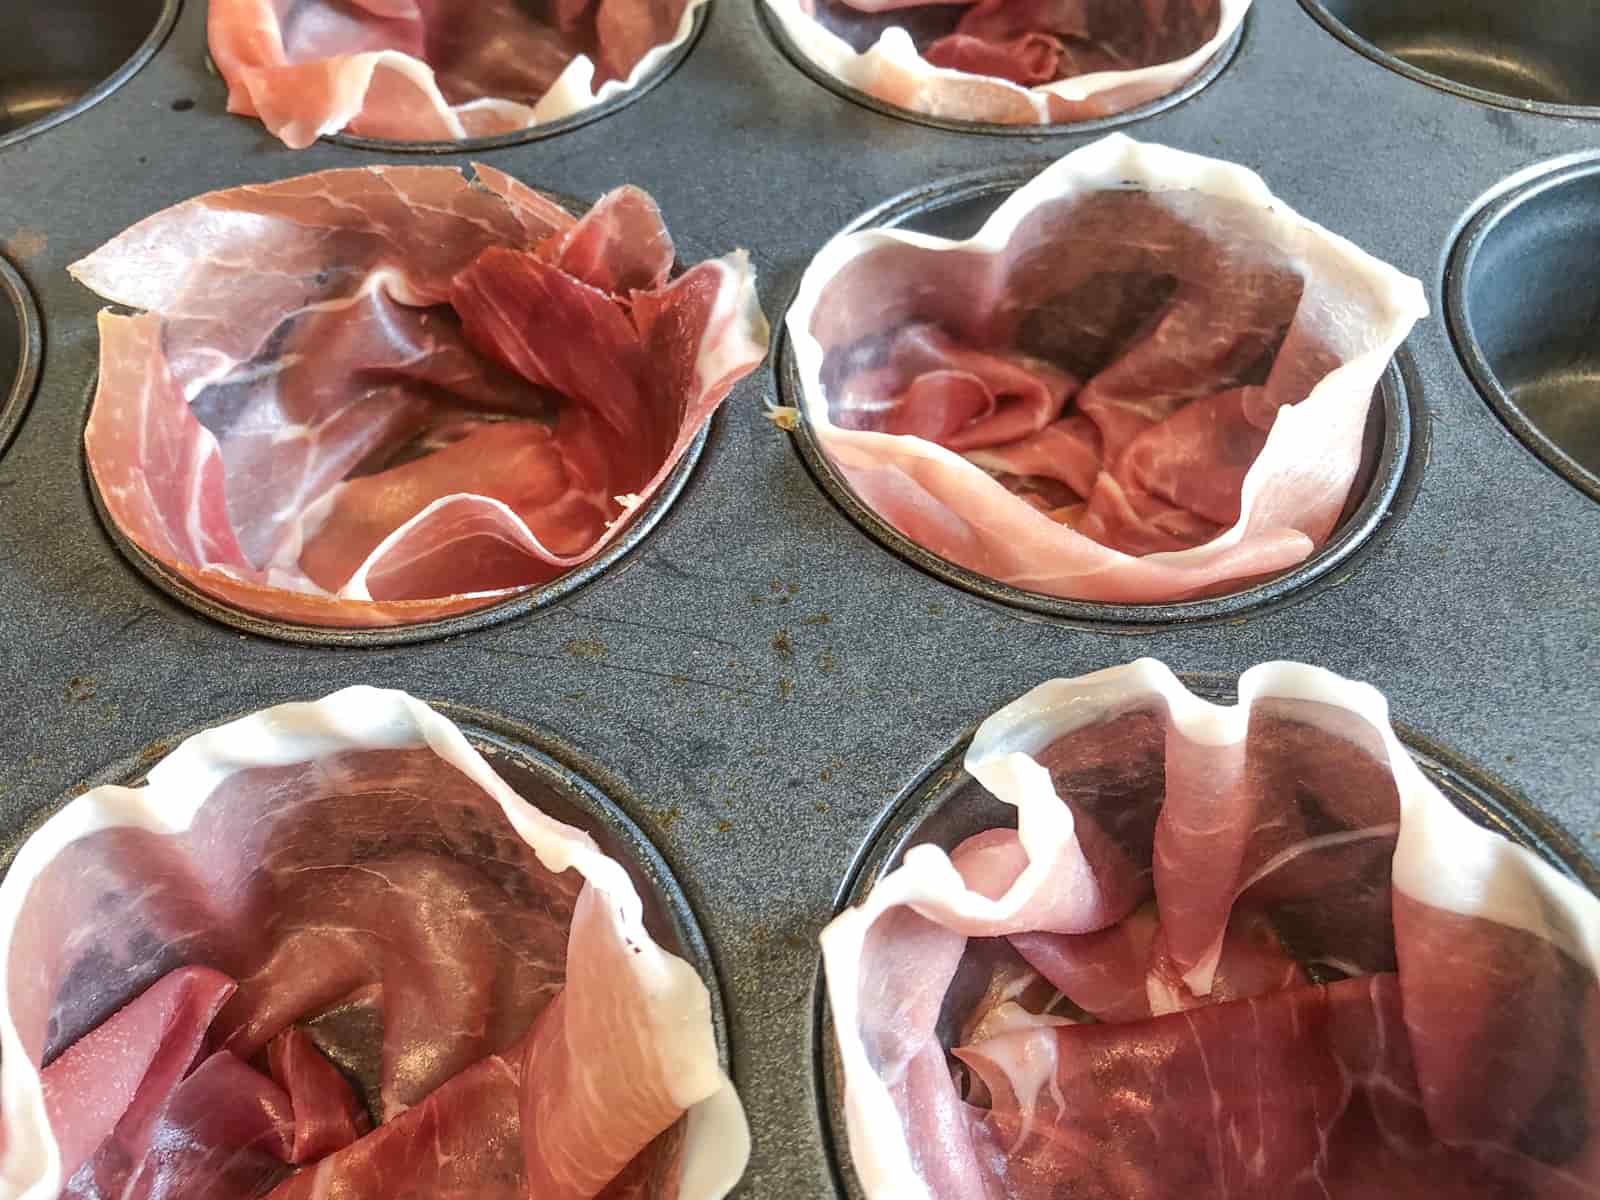 Slices of wafer thin parma ham lining a muffin tray to before eggs are added.